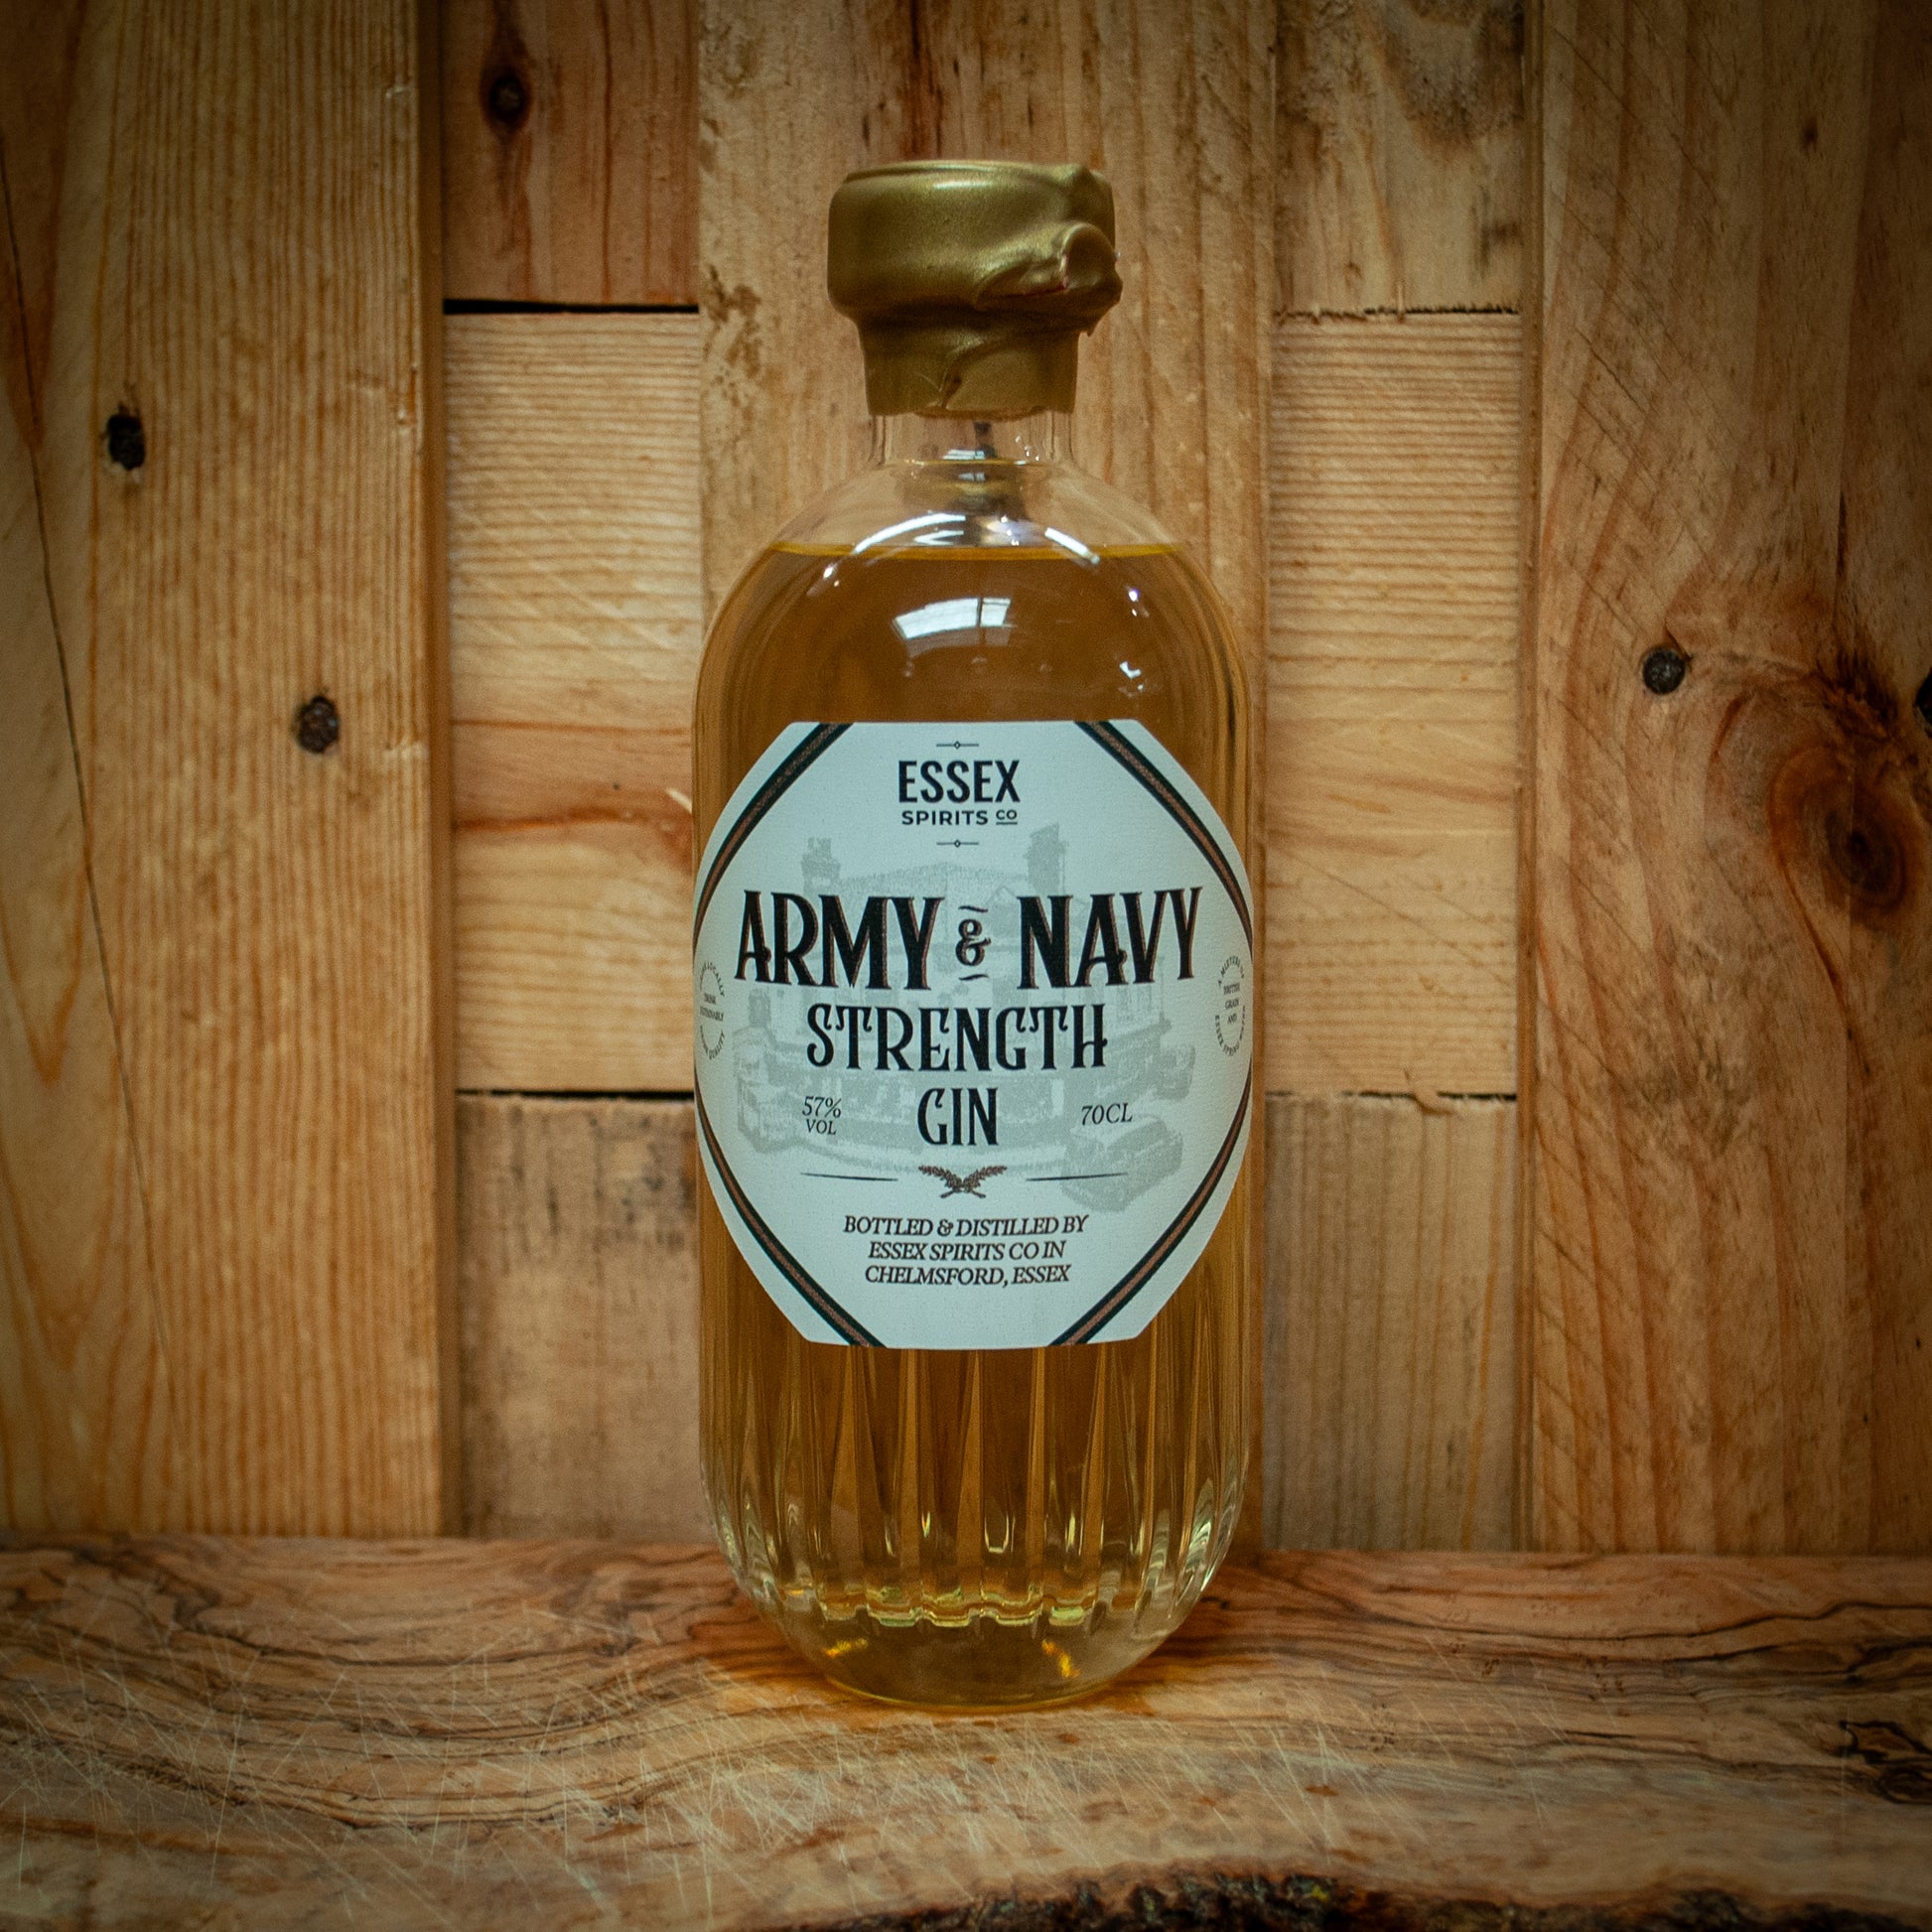 Army & Navy Strength Gin from Essex Spirits Company, Chelmsford Distillery